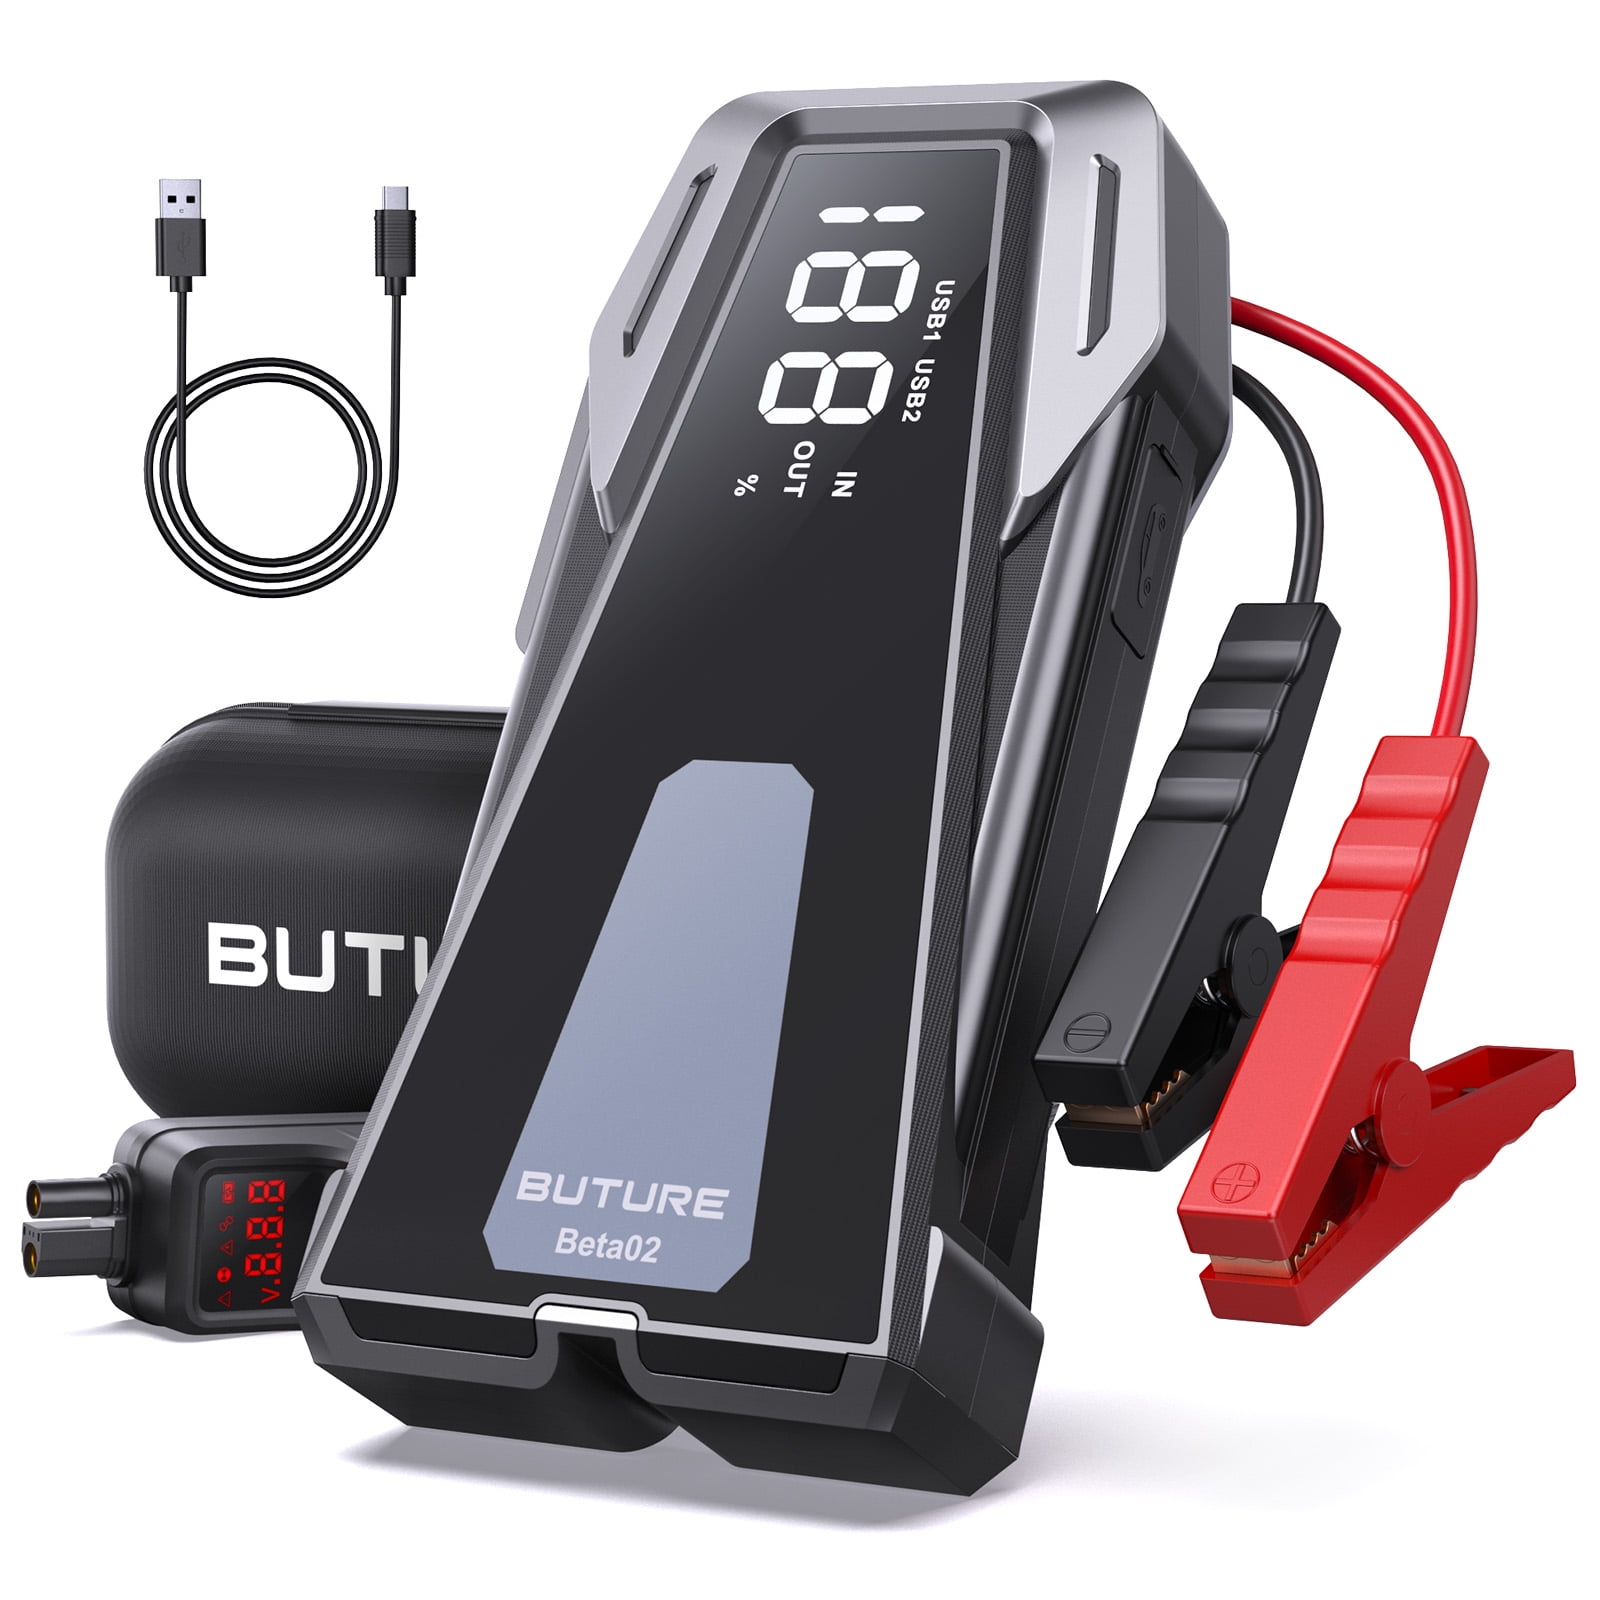 BUTURE Car Battery Jump Starters with Quick Charge, Large Display, Lights